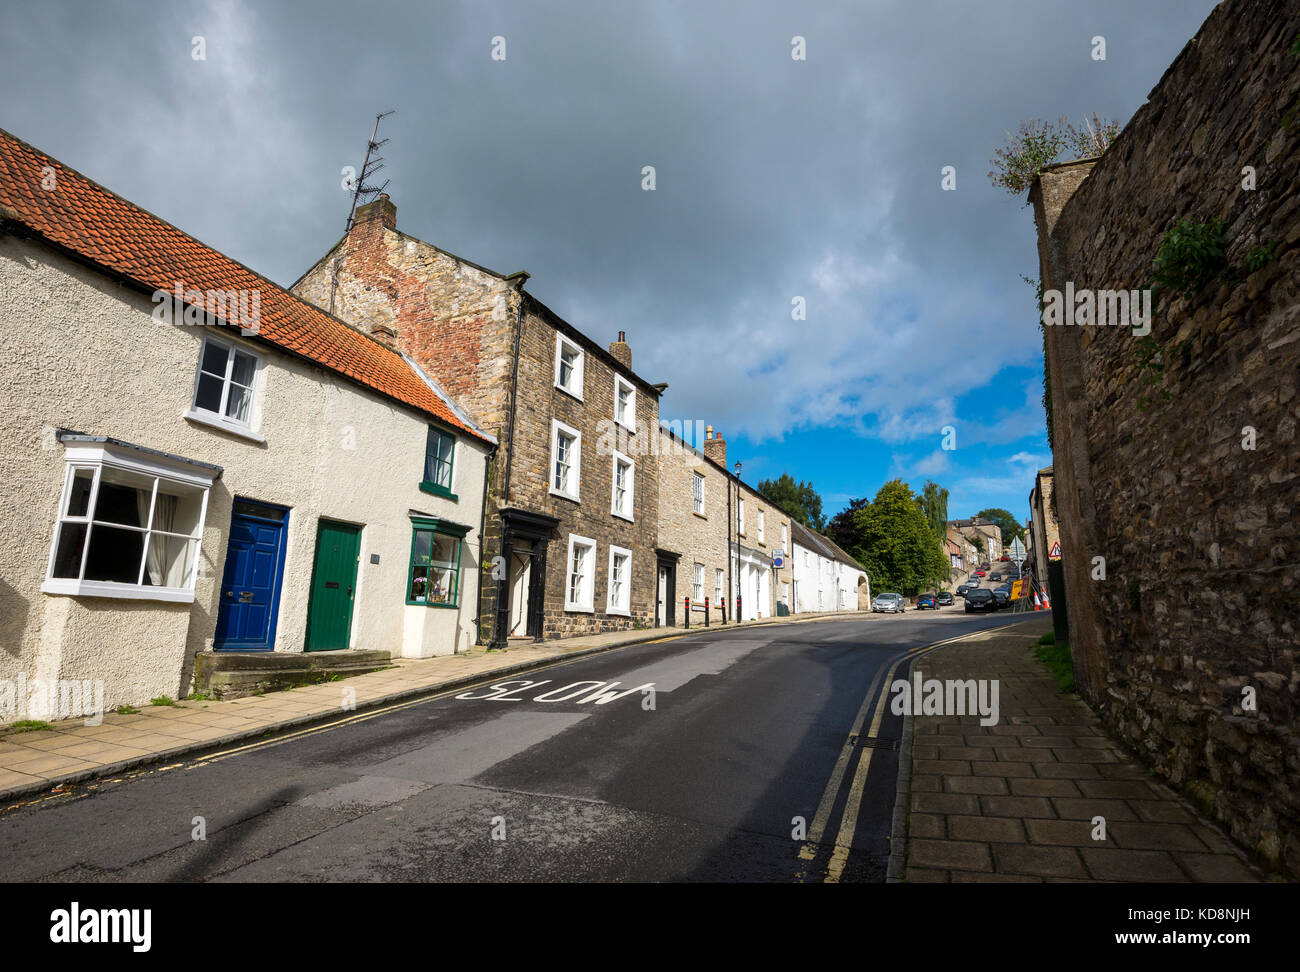 Quiet street on the outskirts of the historic town of Richmond, North Yorkshire, England. Stock Photo